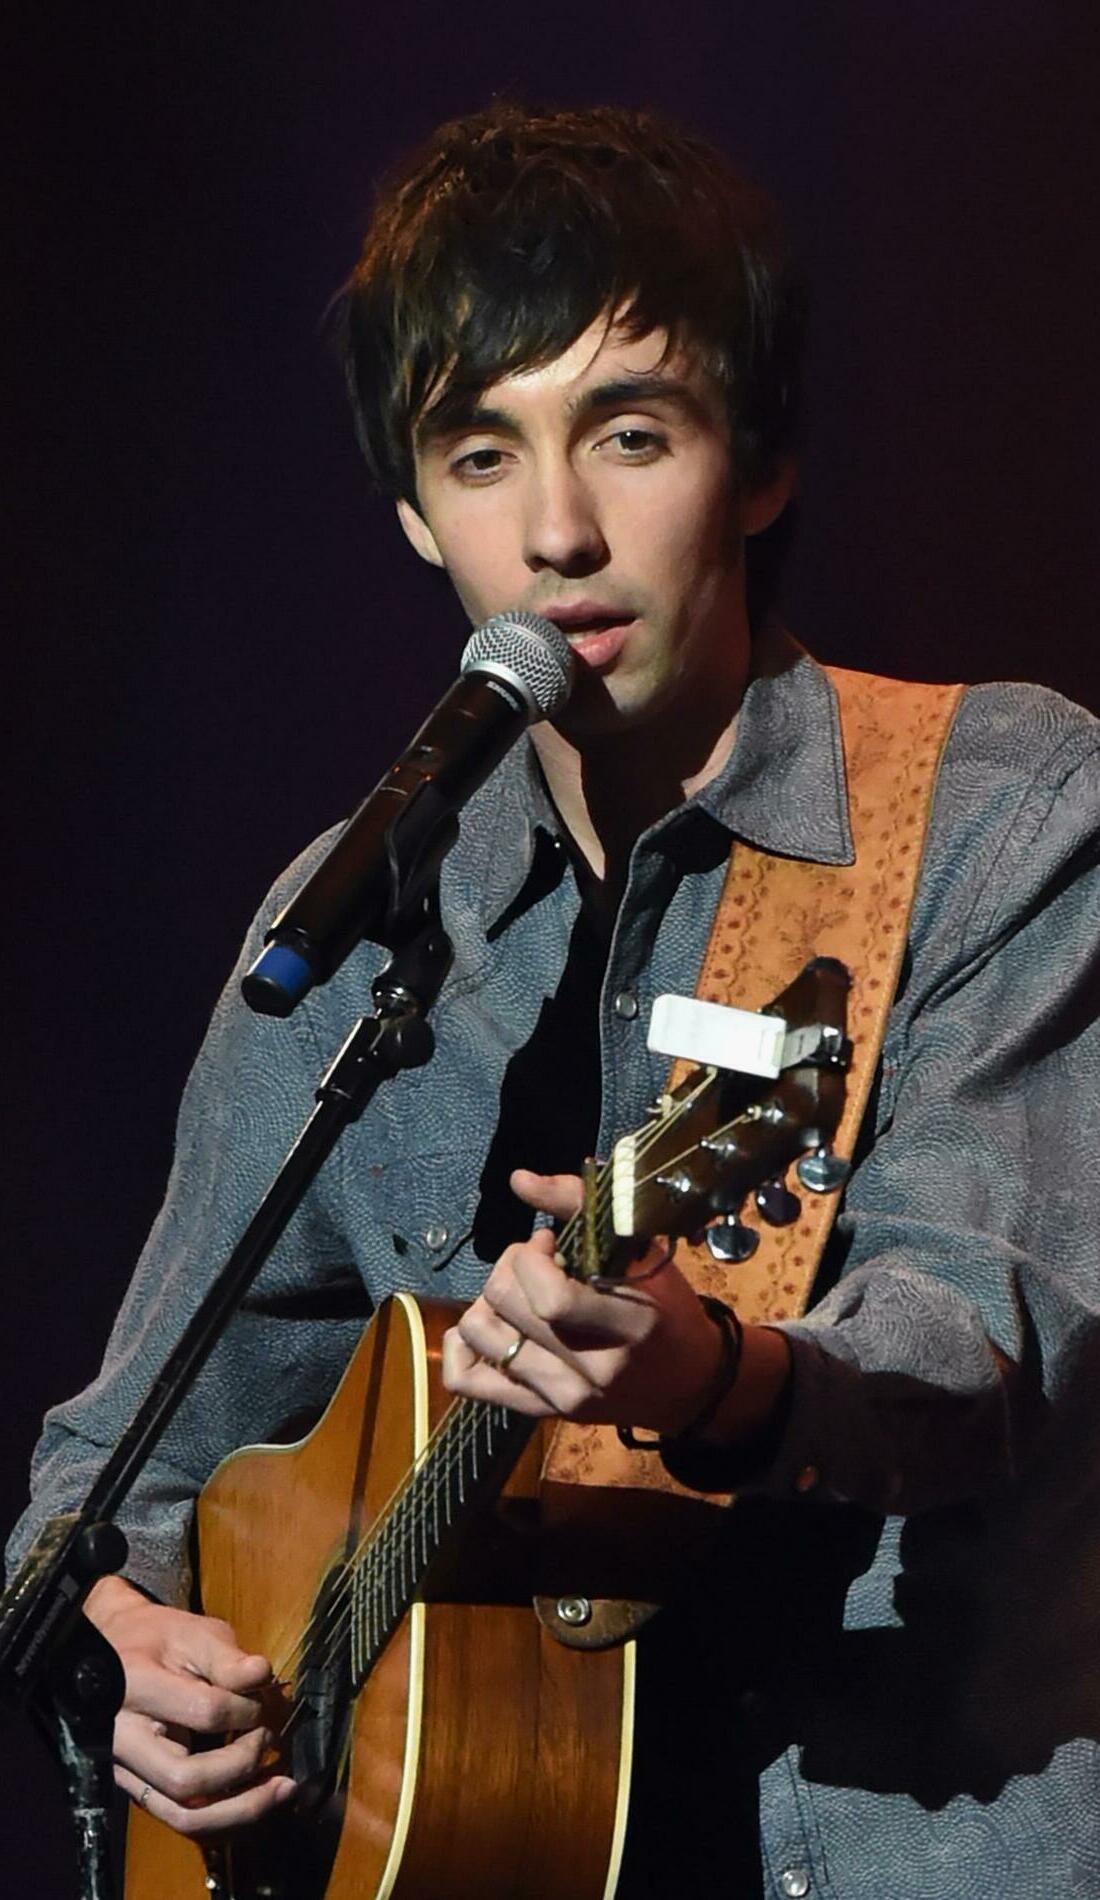 A Mo Pitney live event